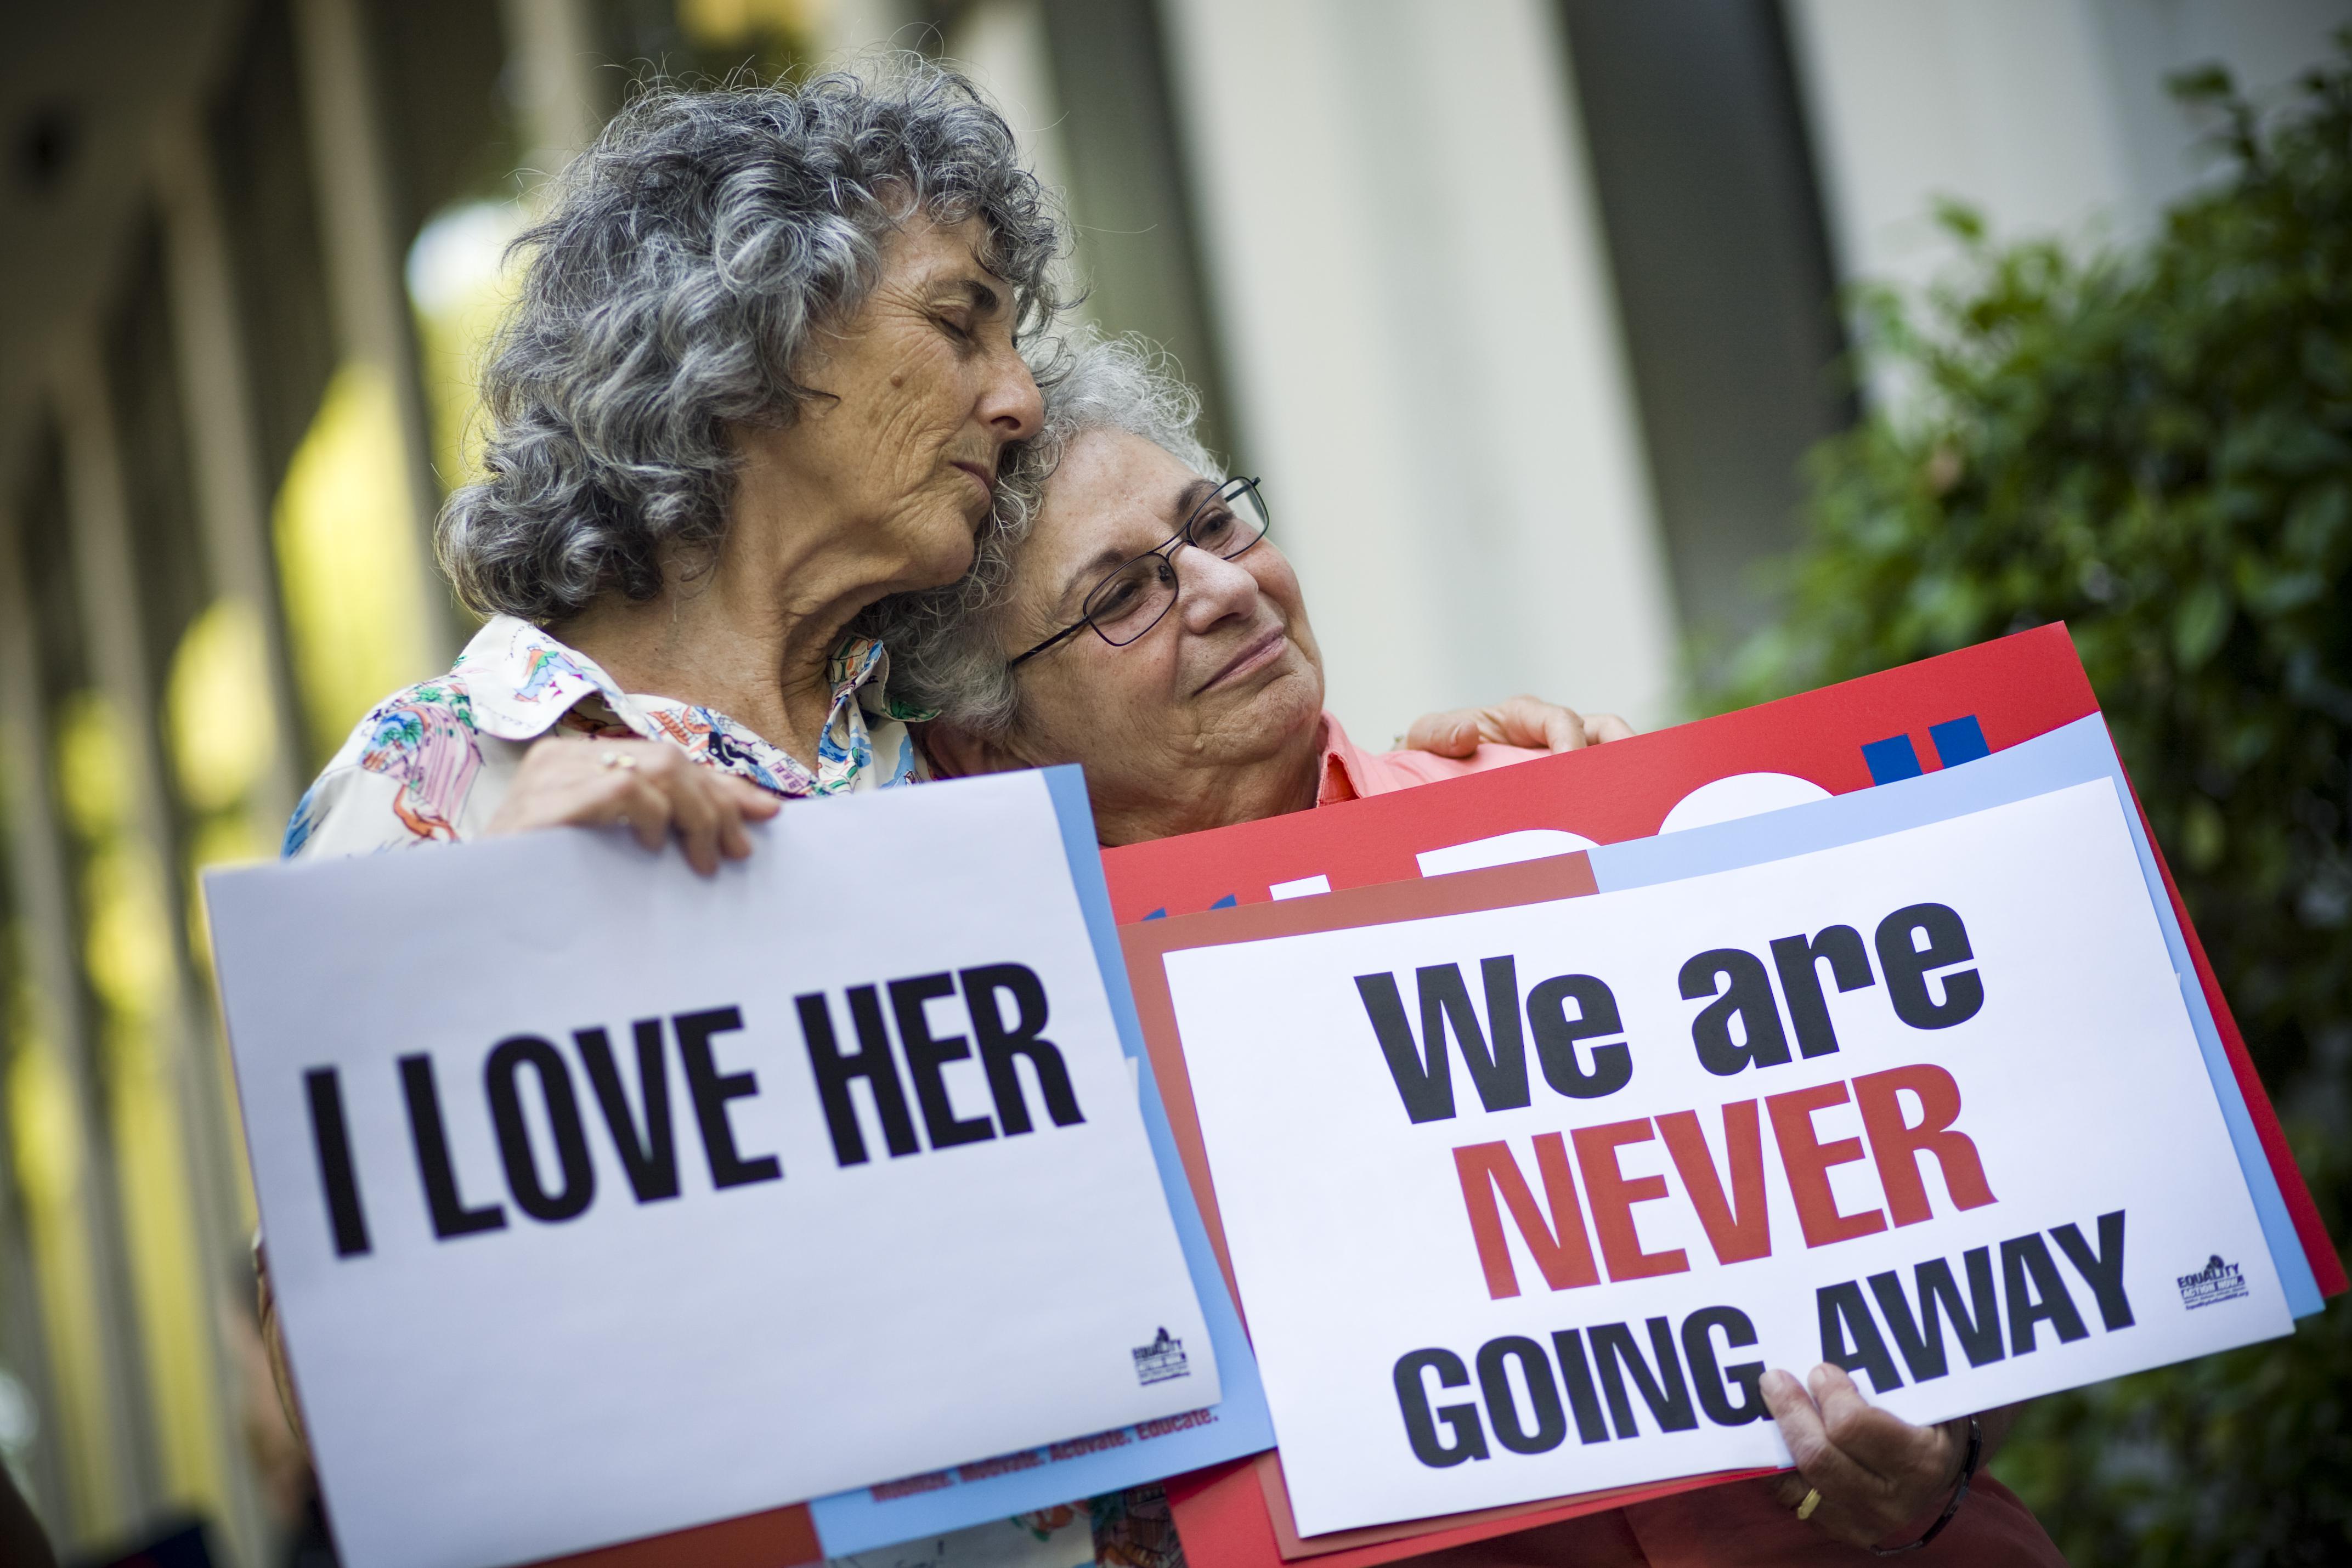 Ellen Pontac (left) and her wife Shelly Bailes celebrate their one-year wedding anniversary and the one-year anniversary of a California Supreme Court ruling allowing same-sex marriages, at a press conference June 17, 2009, in Sacramento, Calif.